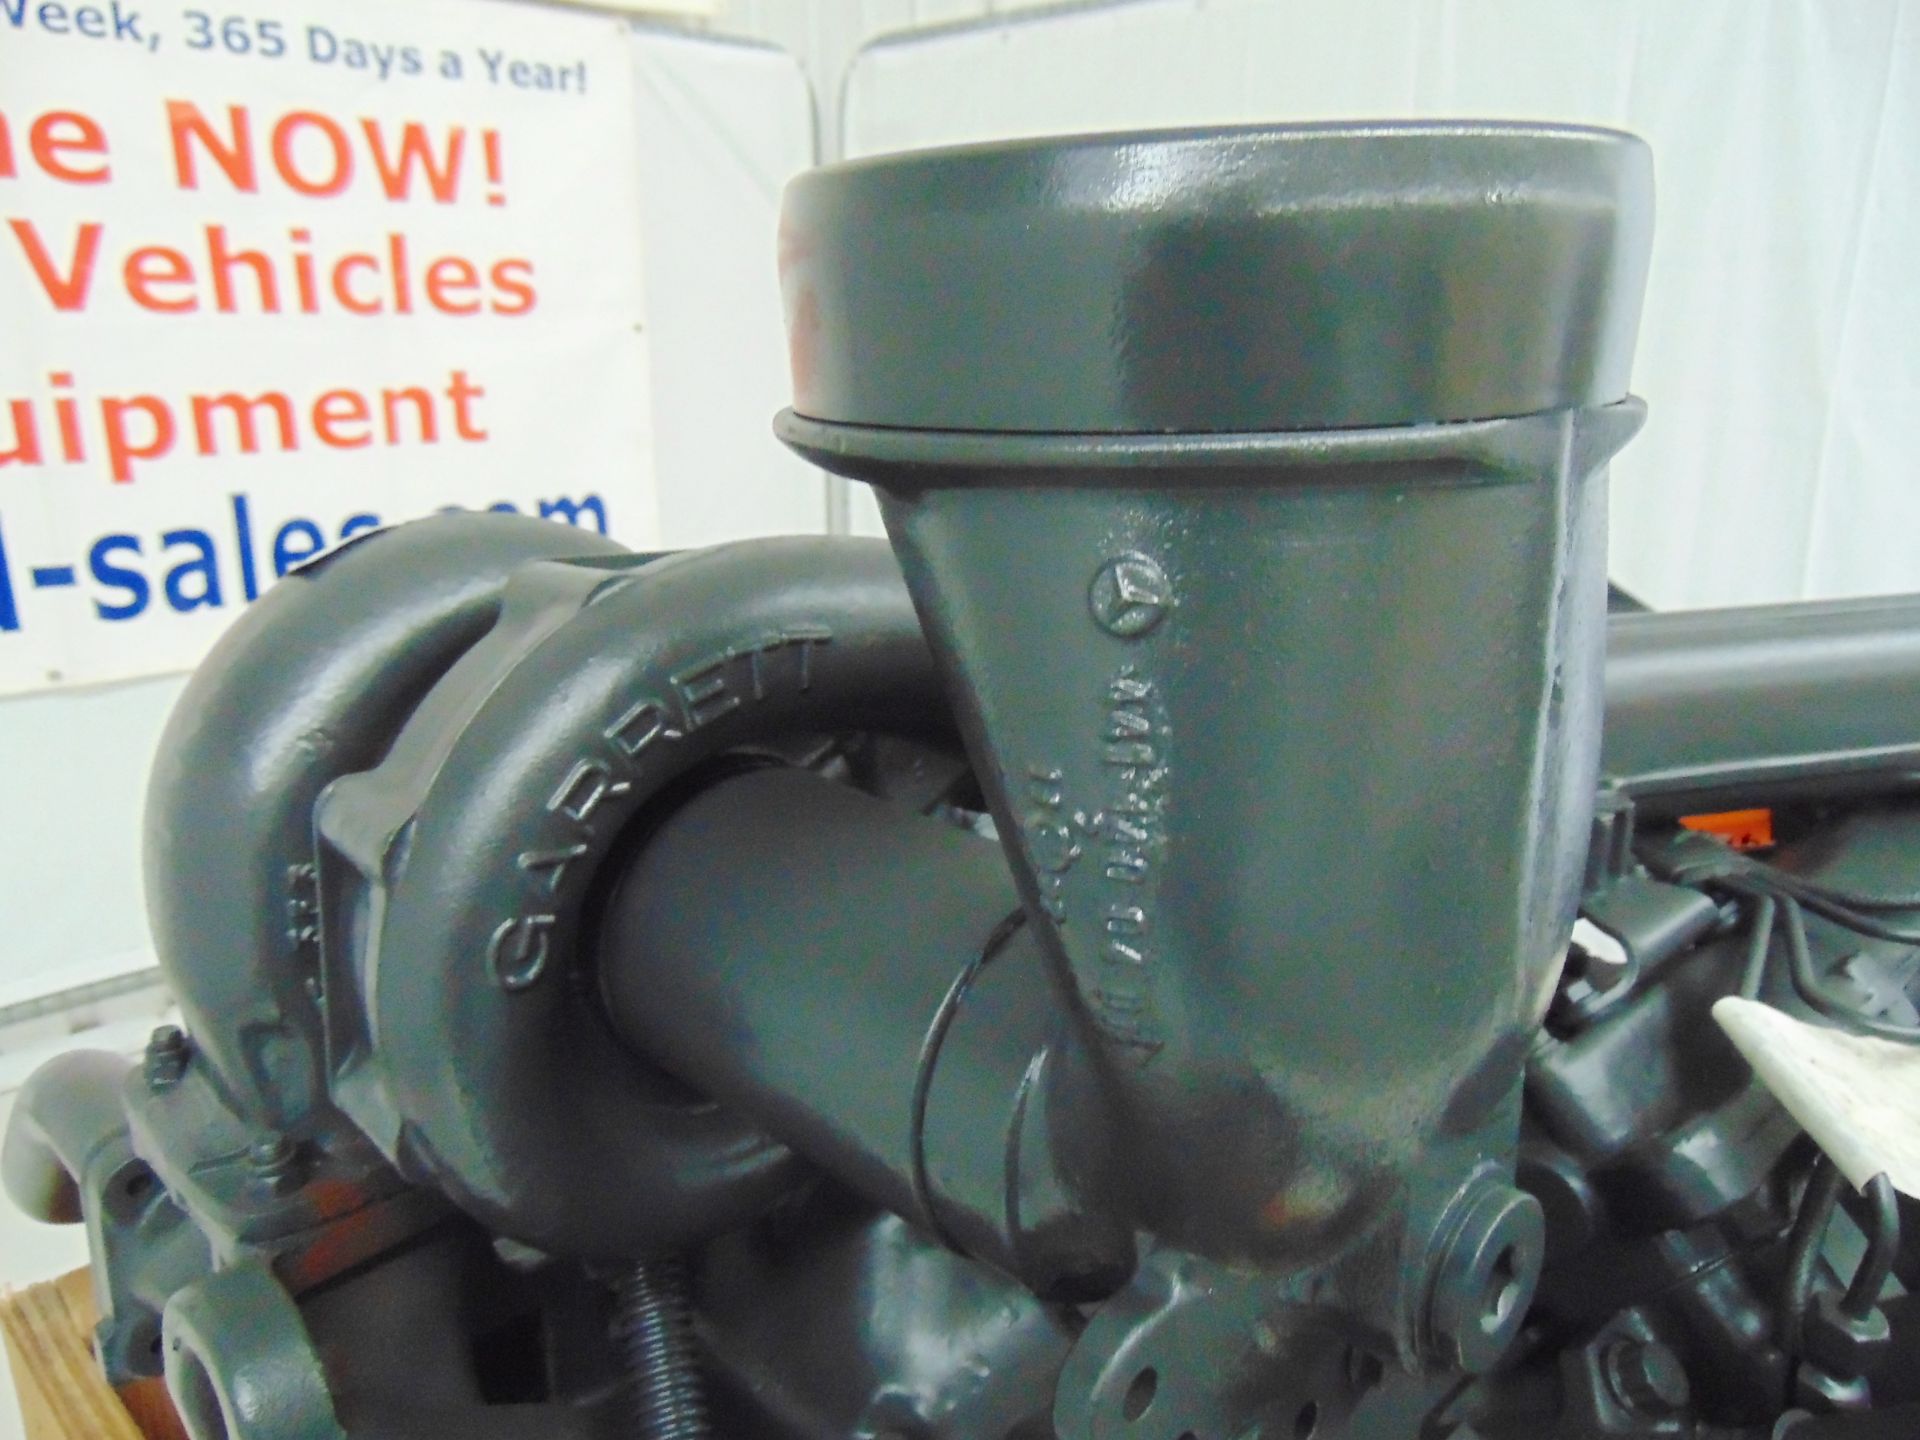 Factory Reconditioned Mercedes-Benz OM441 V6 Turbo Diesel Engine - Image 15 of 17